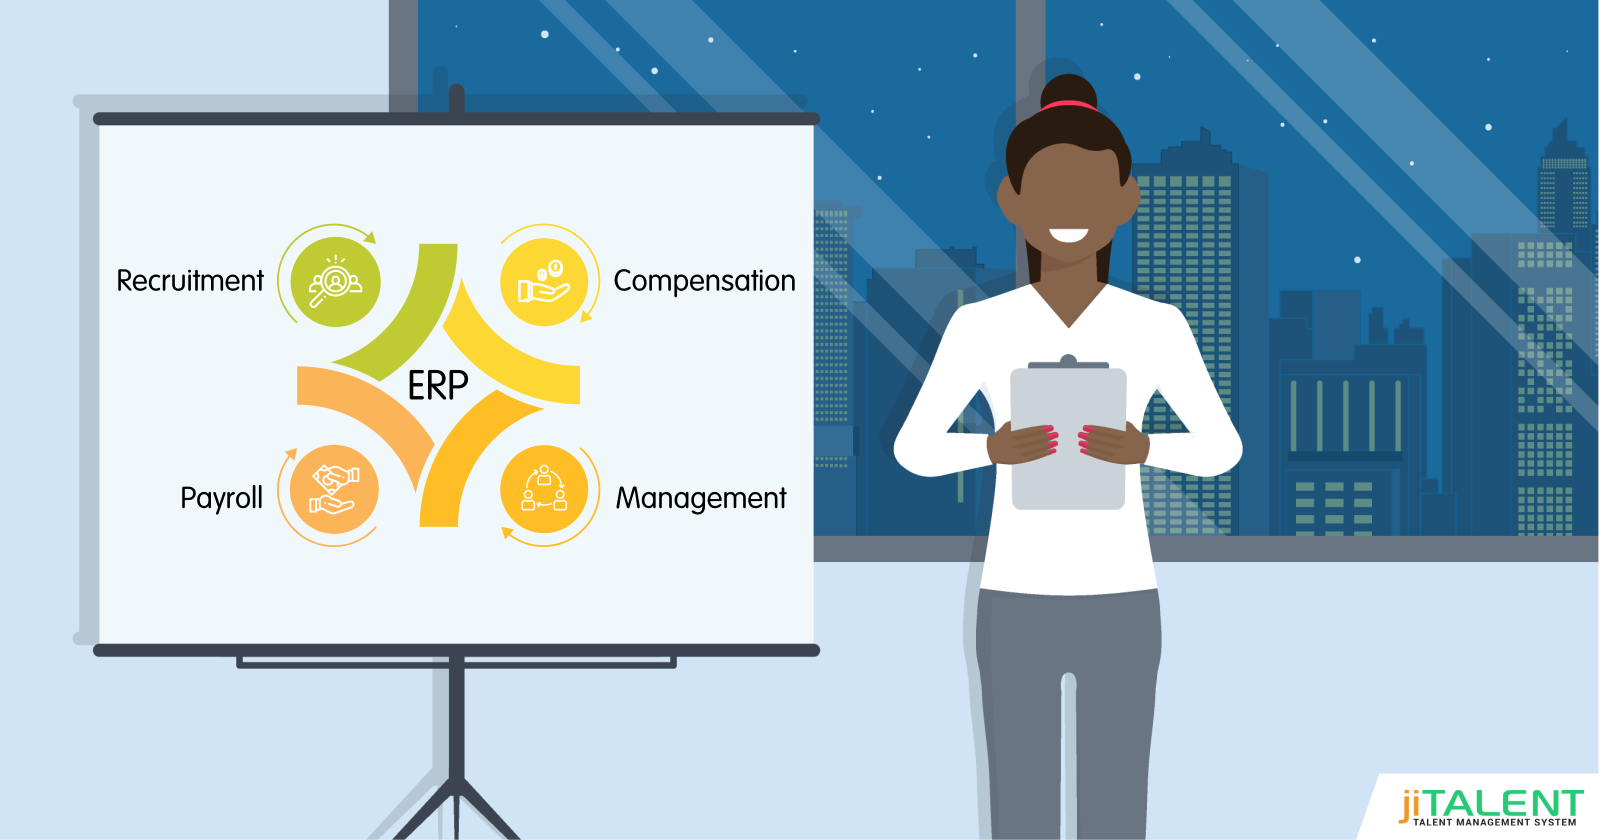 Significant Role of ERP in Talent Management System!